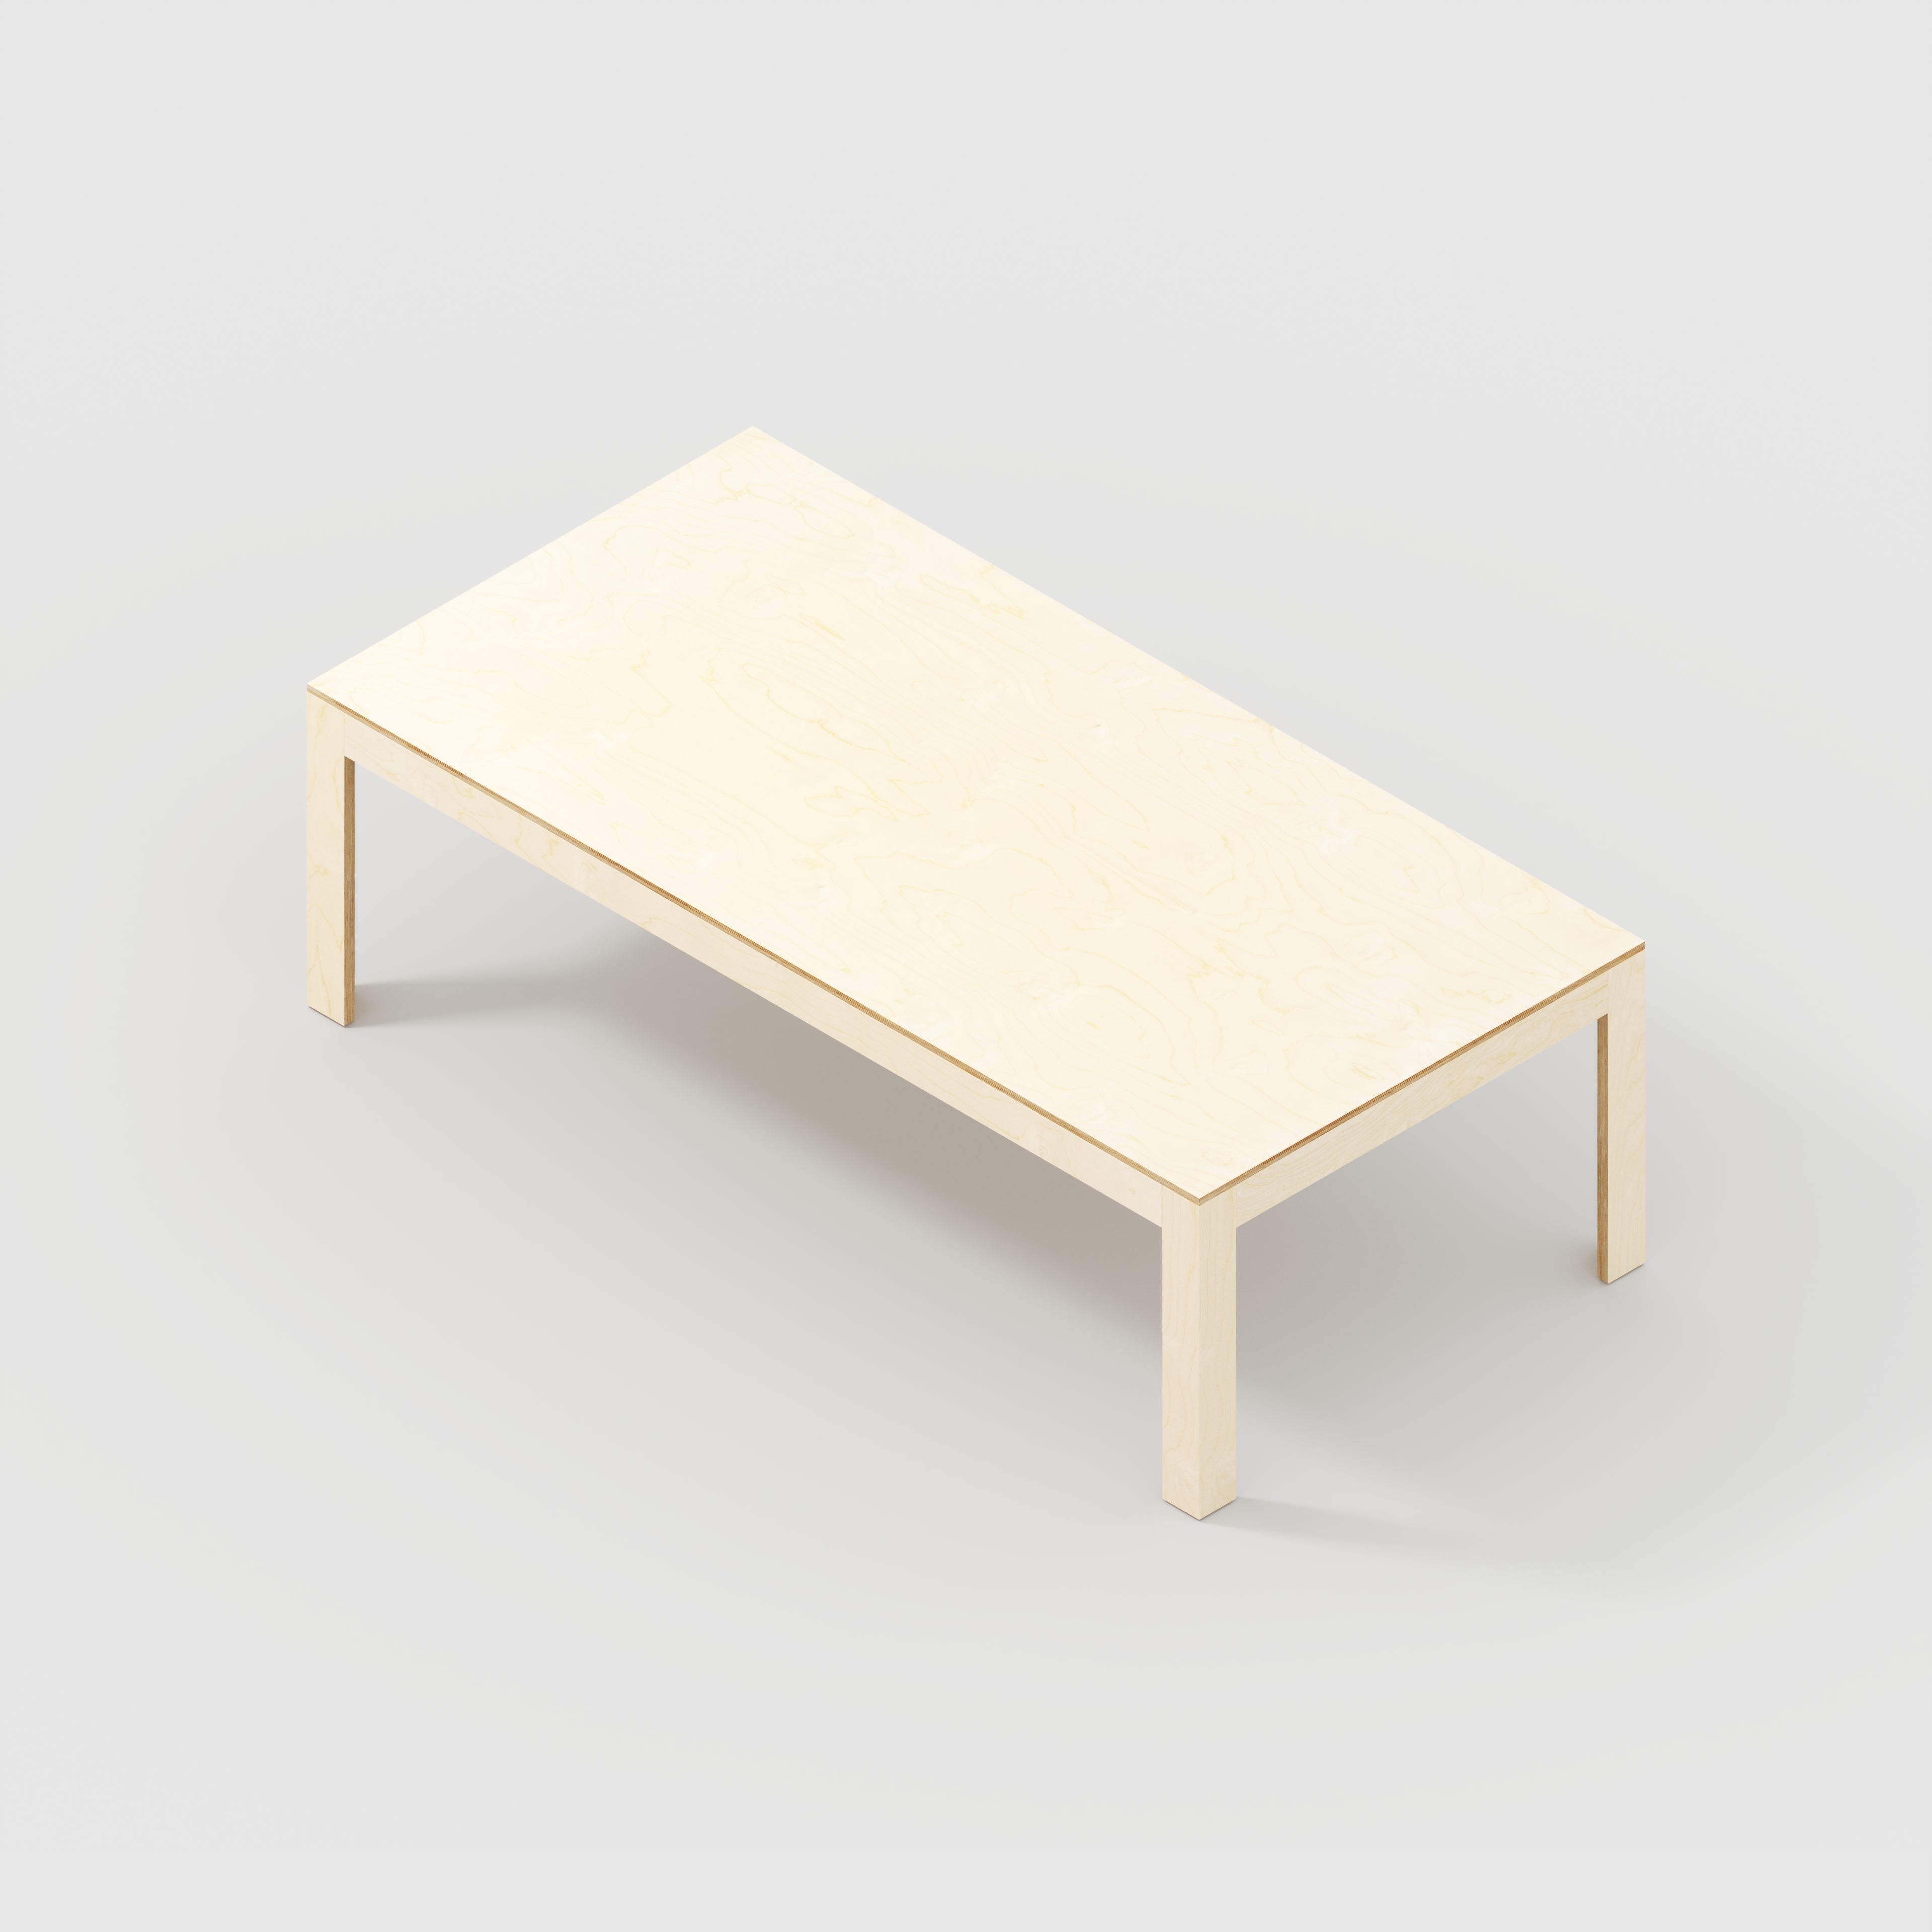 Table with Solid Frame - Plywood Birch - 2400(w) x 1200(d) x 750(h)